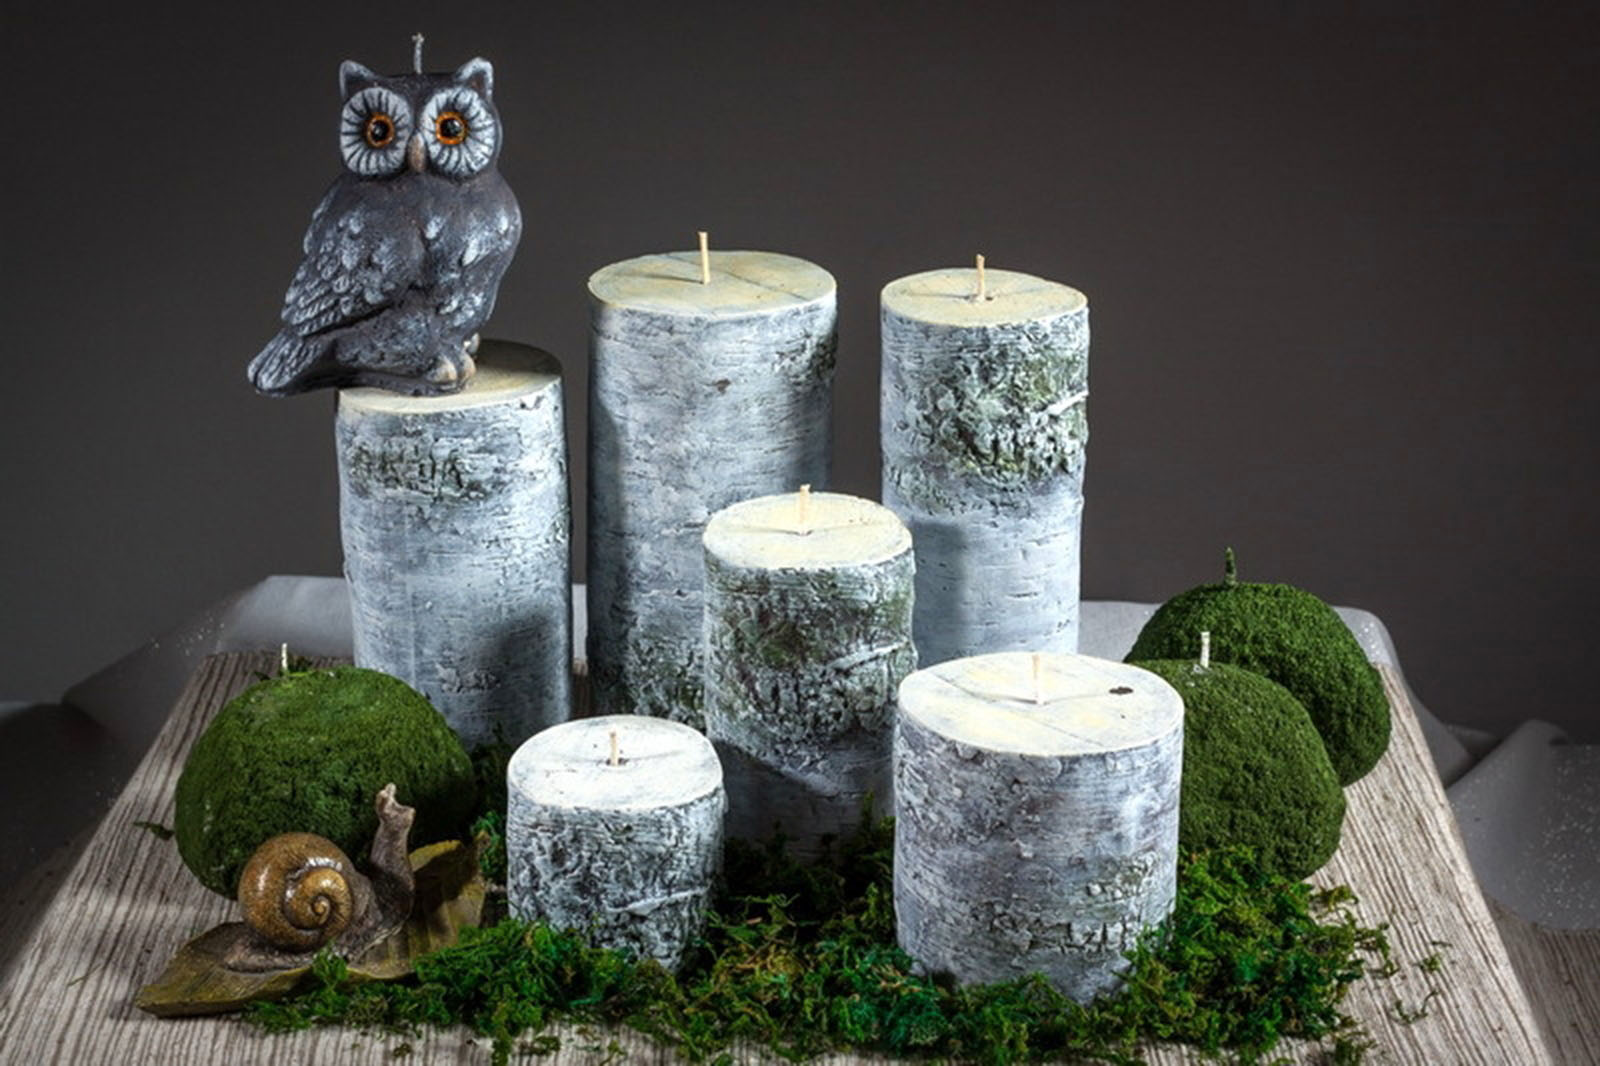 Six Birch candles surrounded by the moss and figurine of a snail and an owl